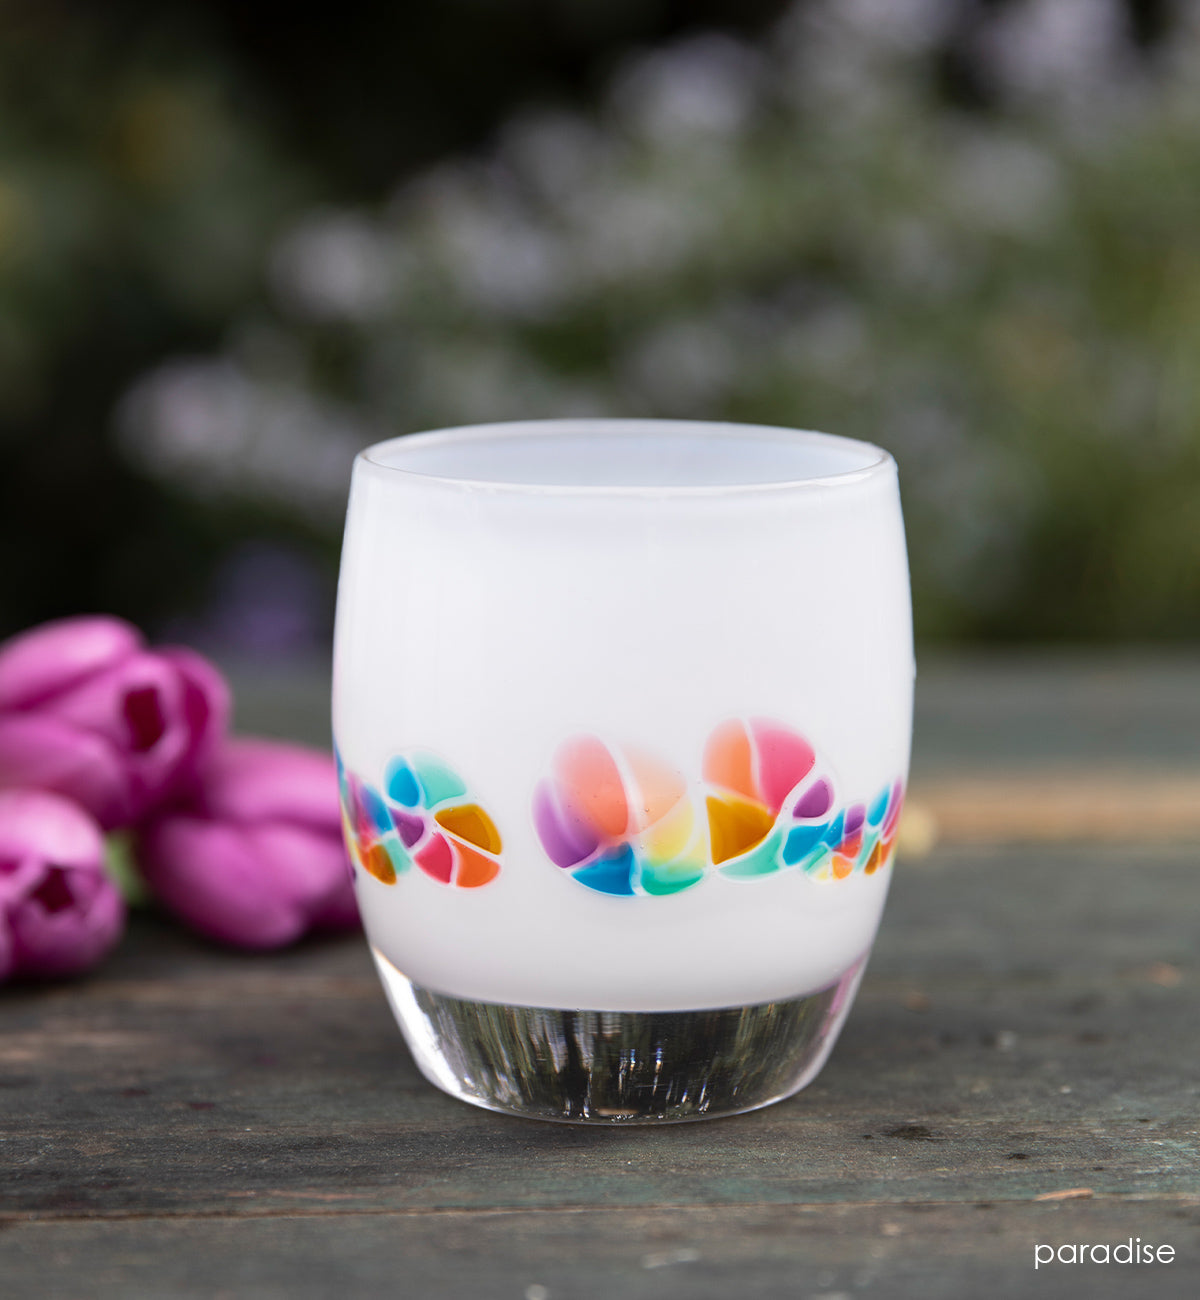 paradise white rainbow murrini detail hand-blown glass votive candle holder on a wood surface outside next to pink tulips.